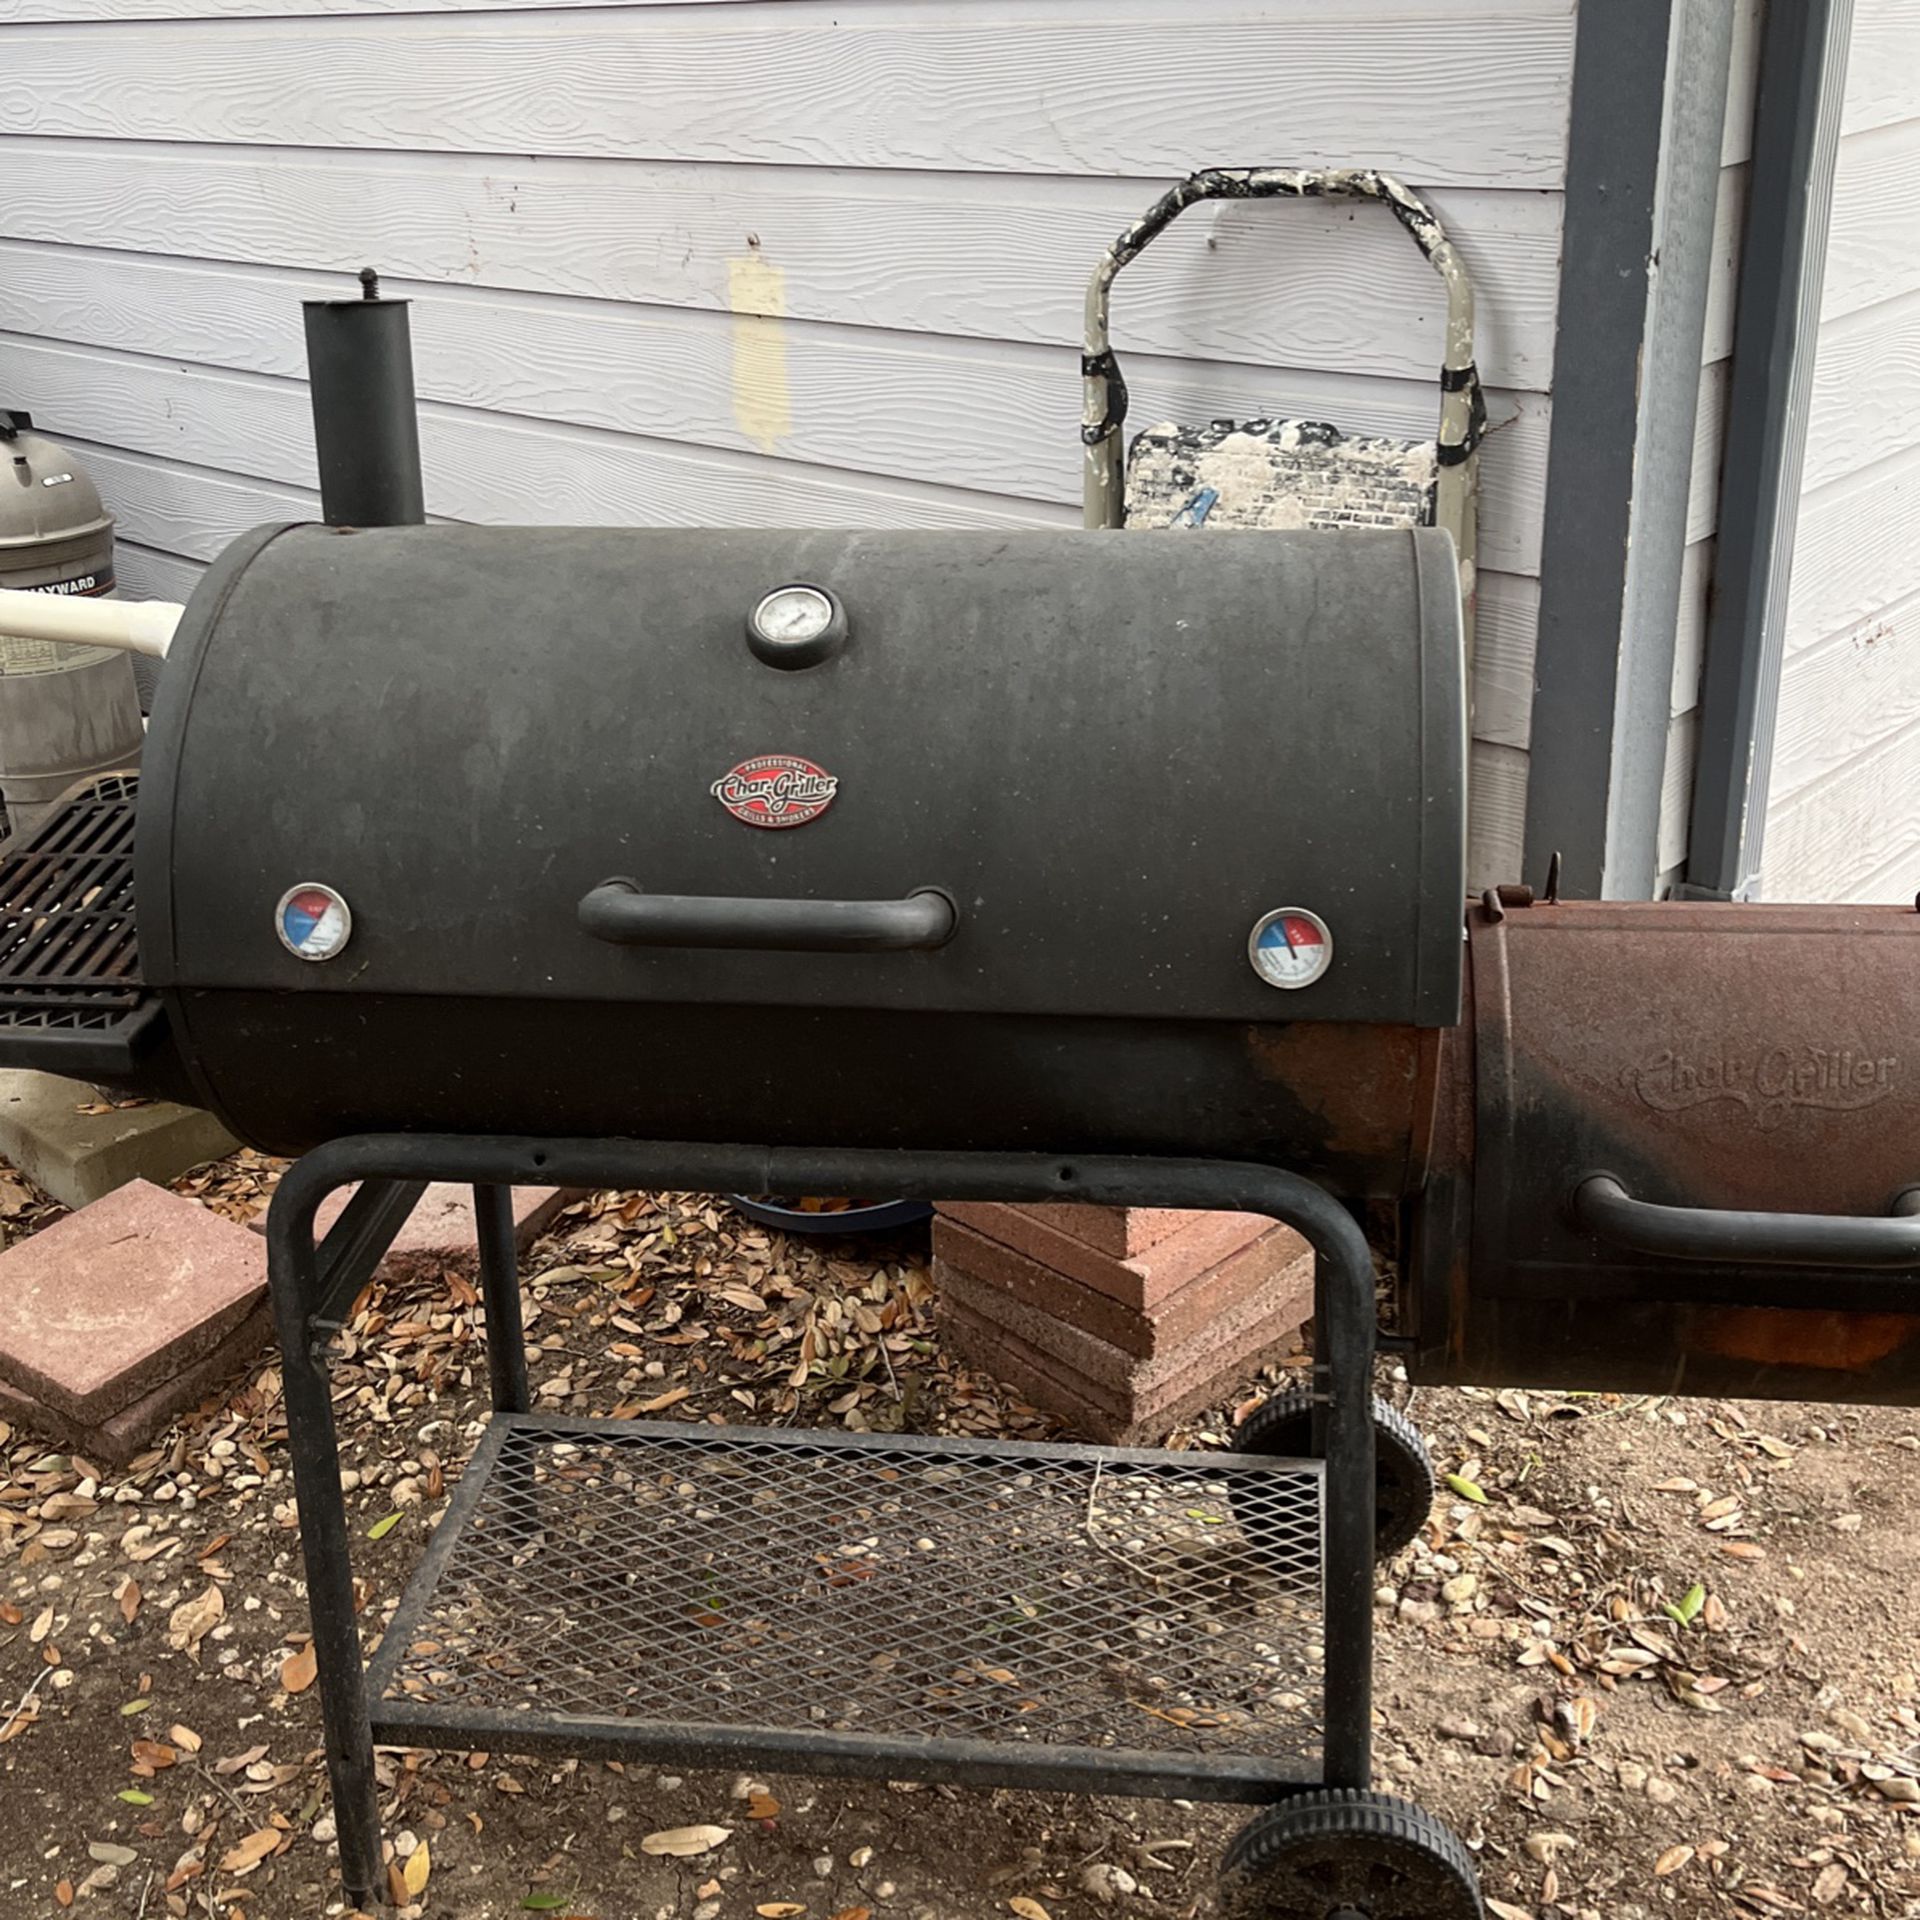 Chargrill Off Set Smoker And BBQ Grill